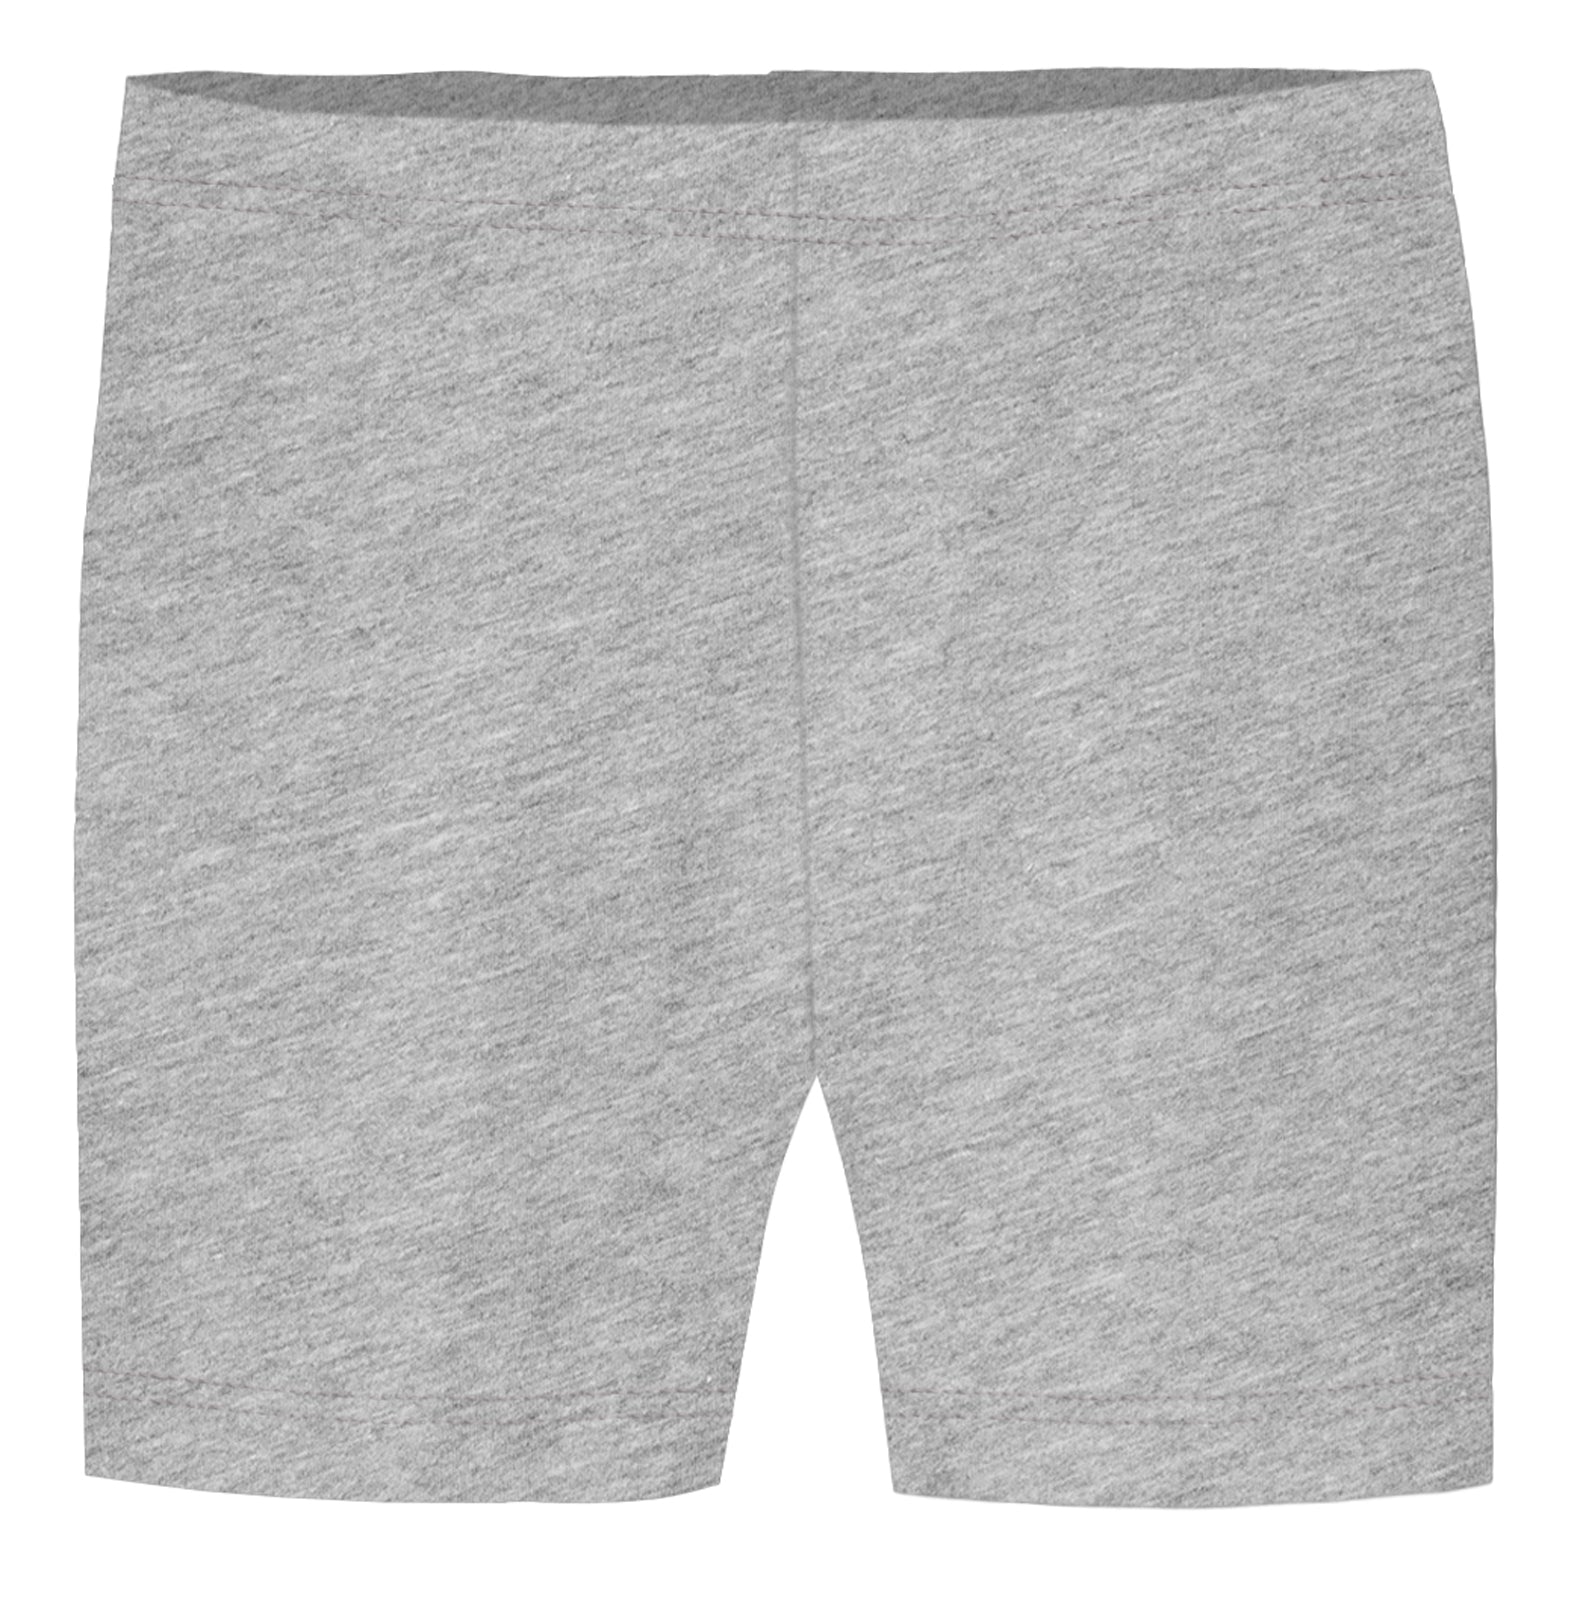 Girls Leggings & Bike Shorts - Made in the USA  City Threads Tagged  color_Road - City Threads USA